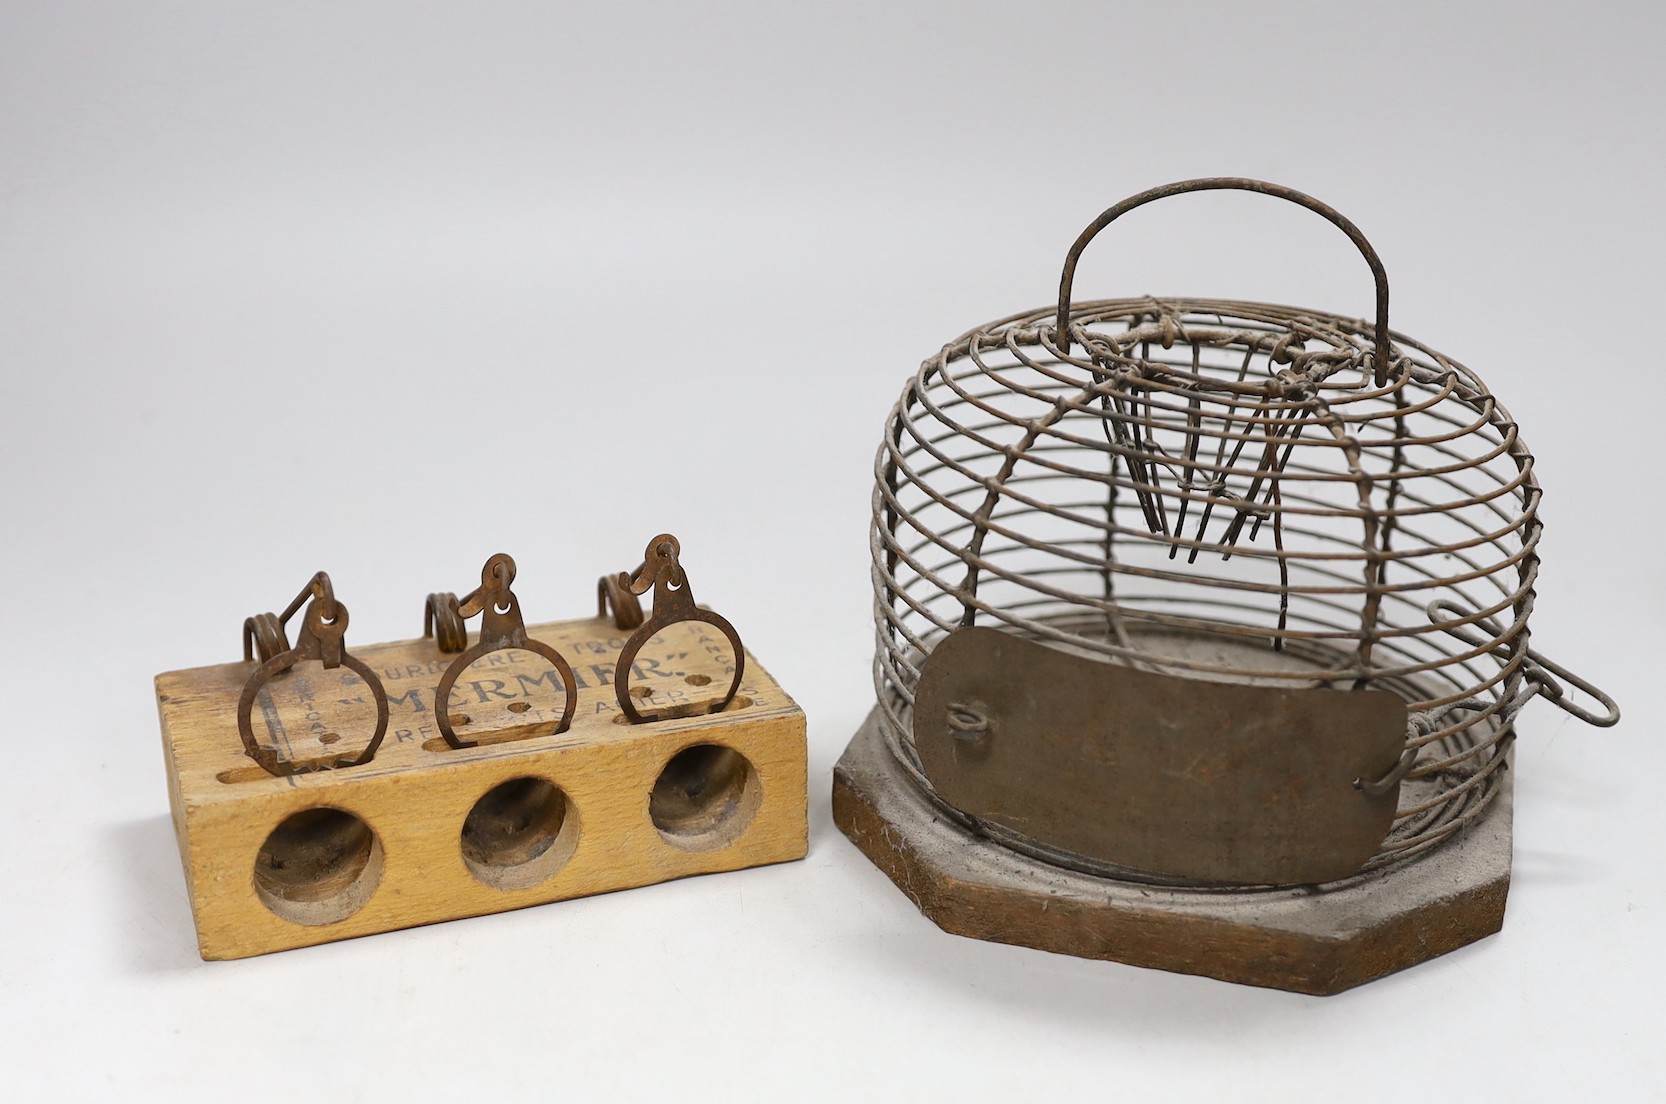 A circular metal mouse trap and a Mermier mouse trap